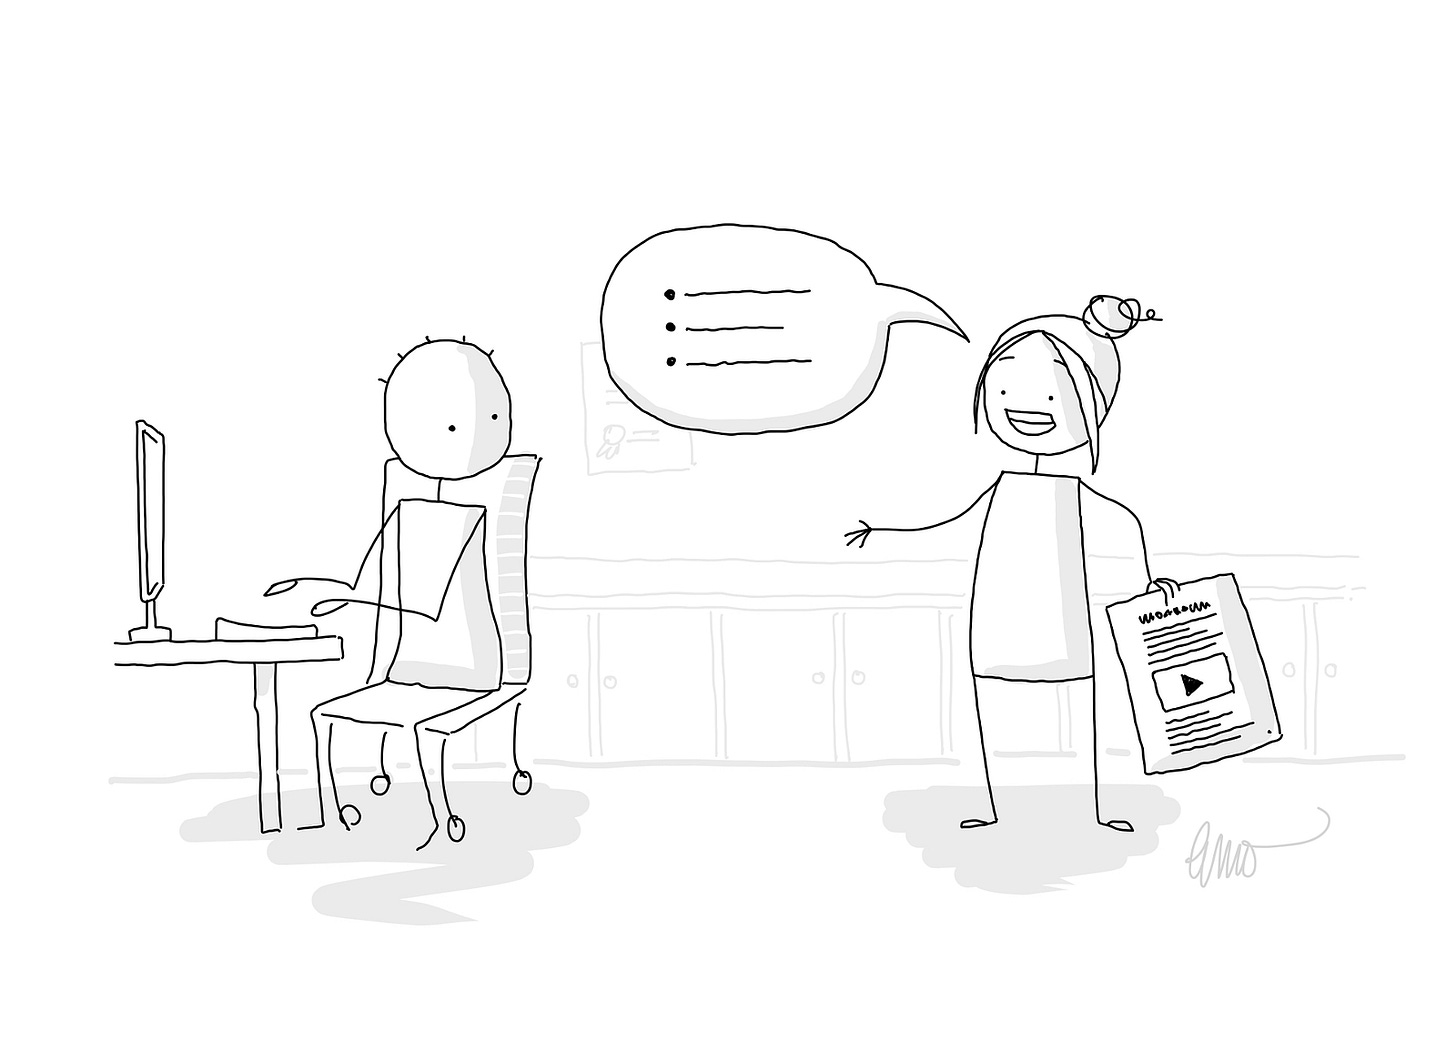 Cartoon line drawing showing two people in an office situation. One is working at a desk, turning around to look at the other, who is speaking to them. The second person has a speech bubble containing 3 concise points, while holding a page containing many lines of text and a video.